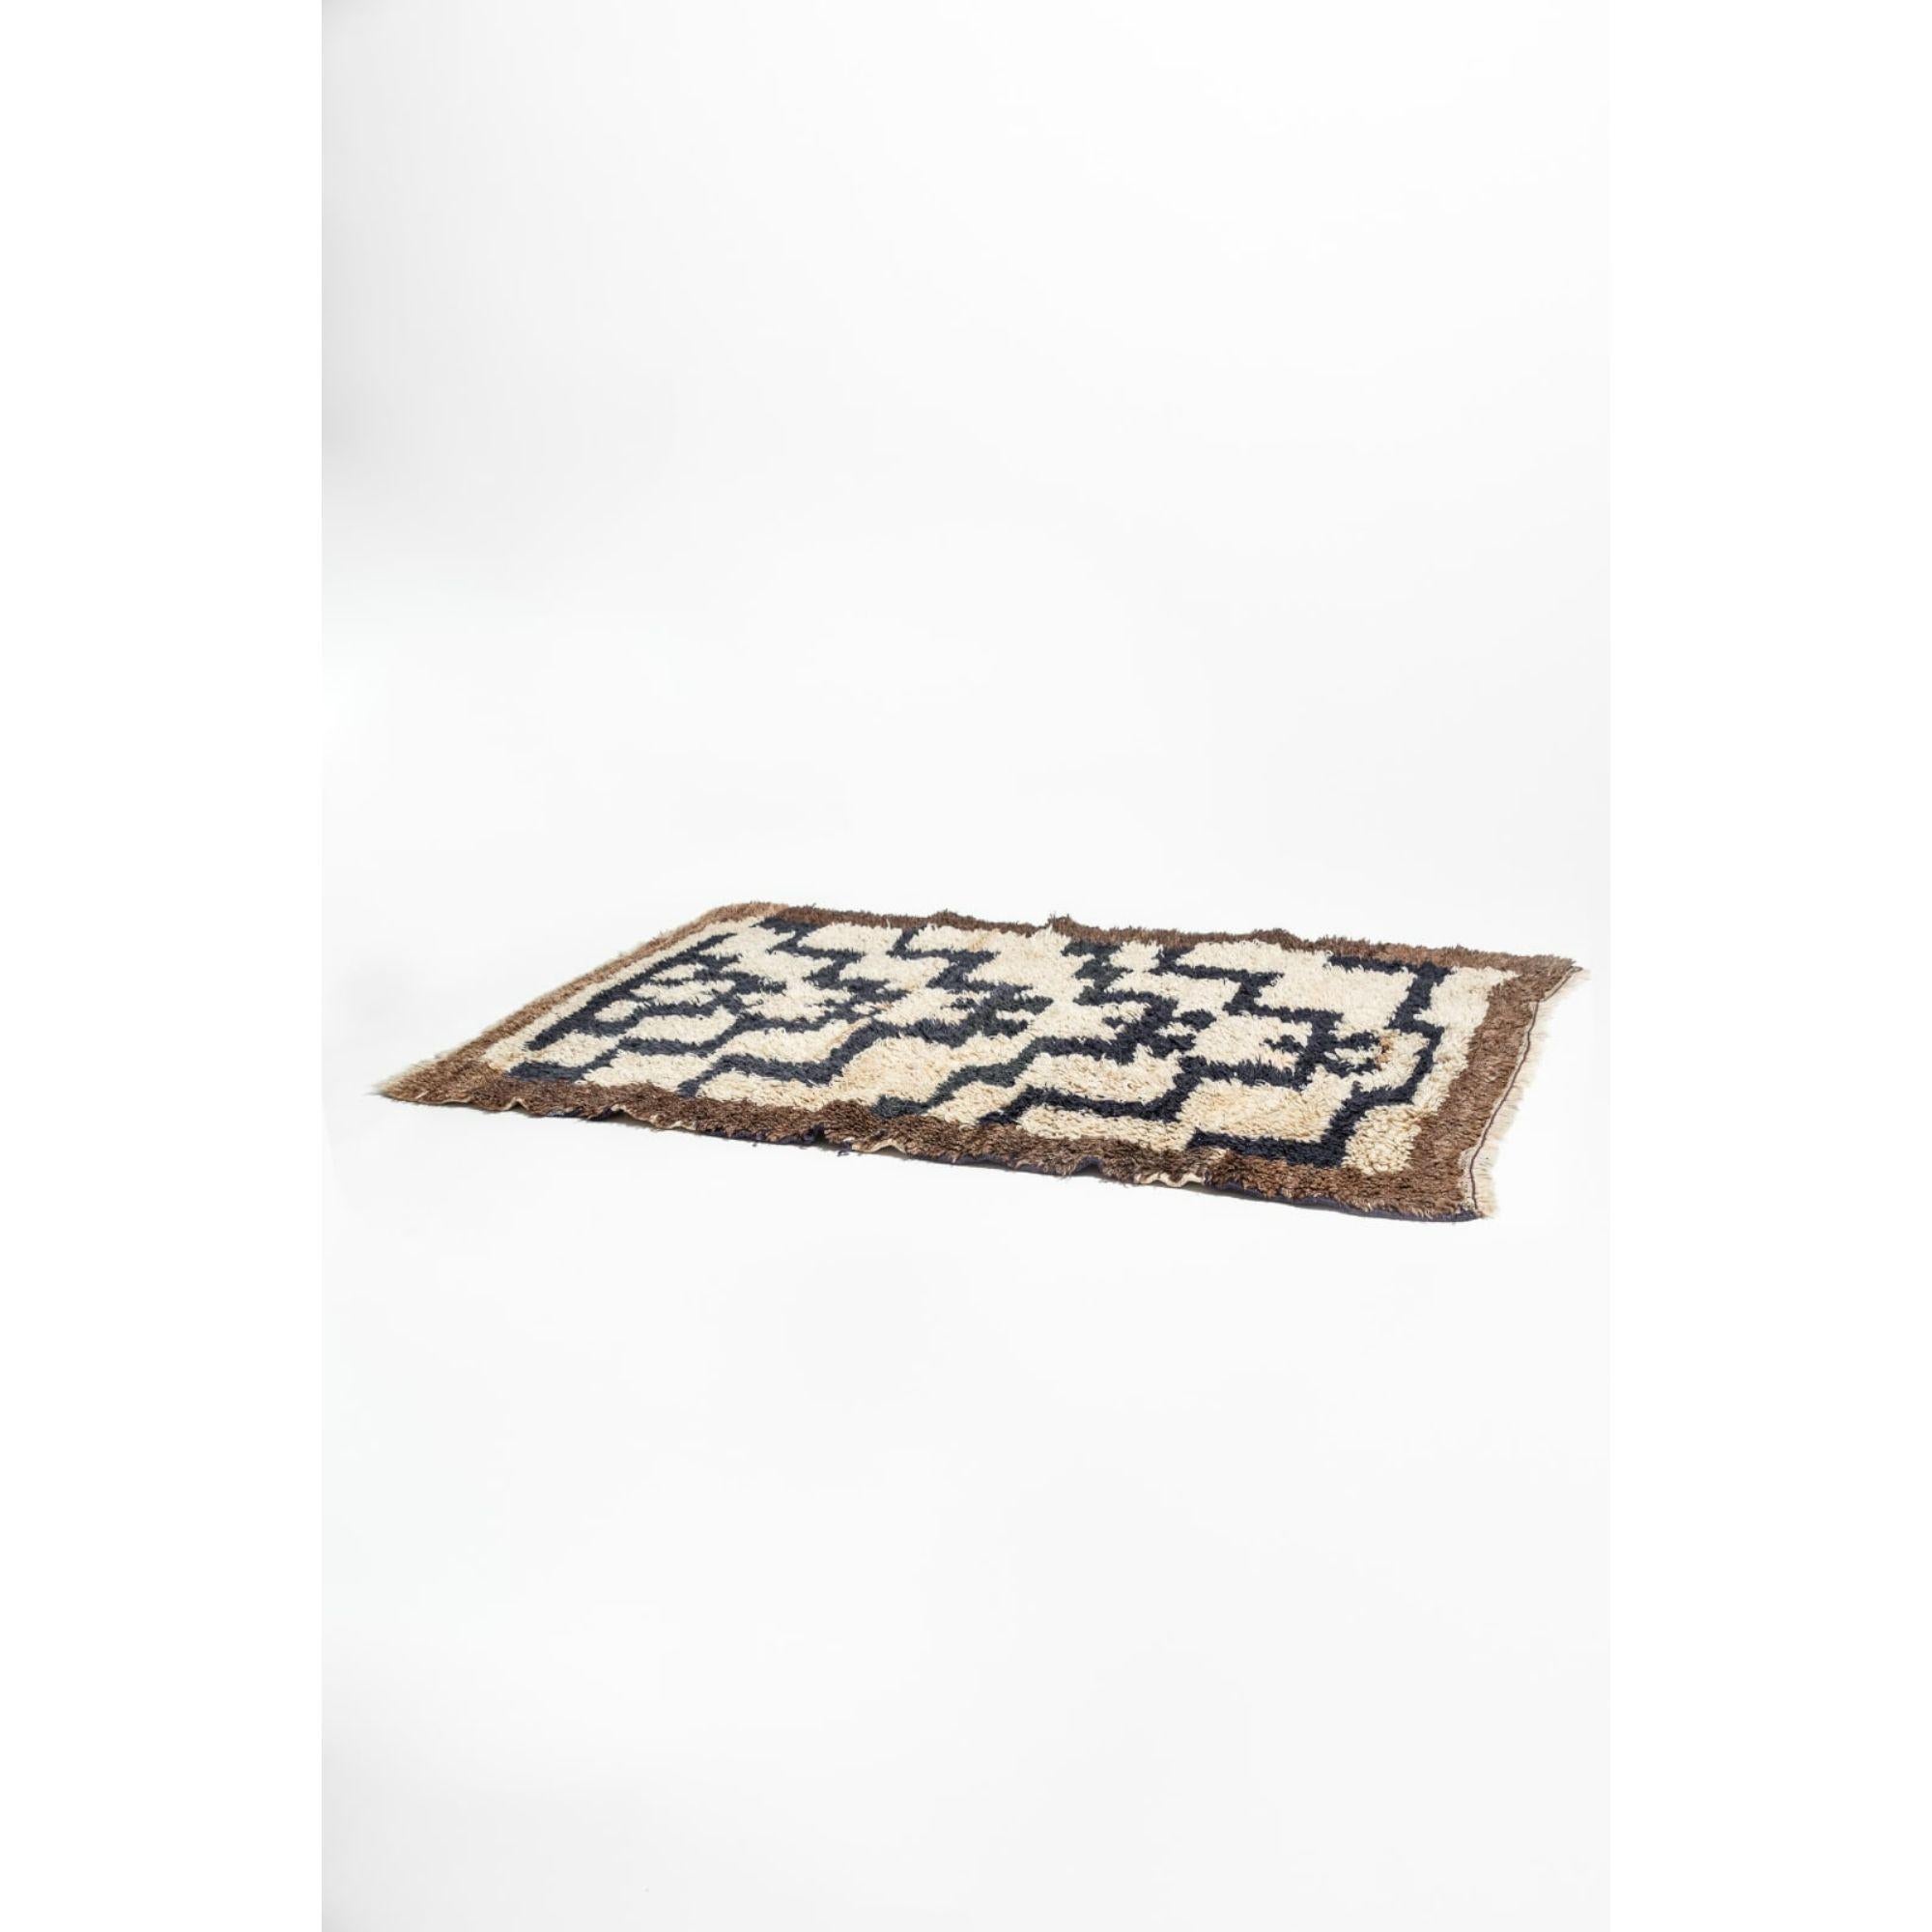 A tulu rug in goat wool

A looped pile tulu rug made in fine angora goat wool. The pine tree design has forebears made in the same location in Konya Turkey since the Seljuk period.

Rug has been cleaned and is ready for use. 

Dimensions: H